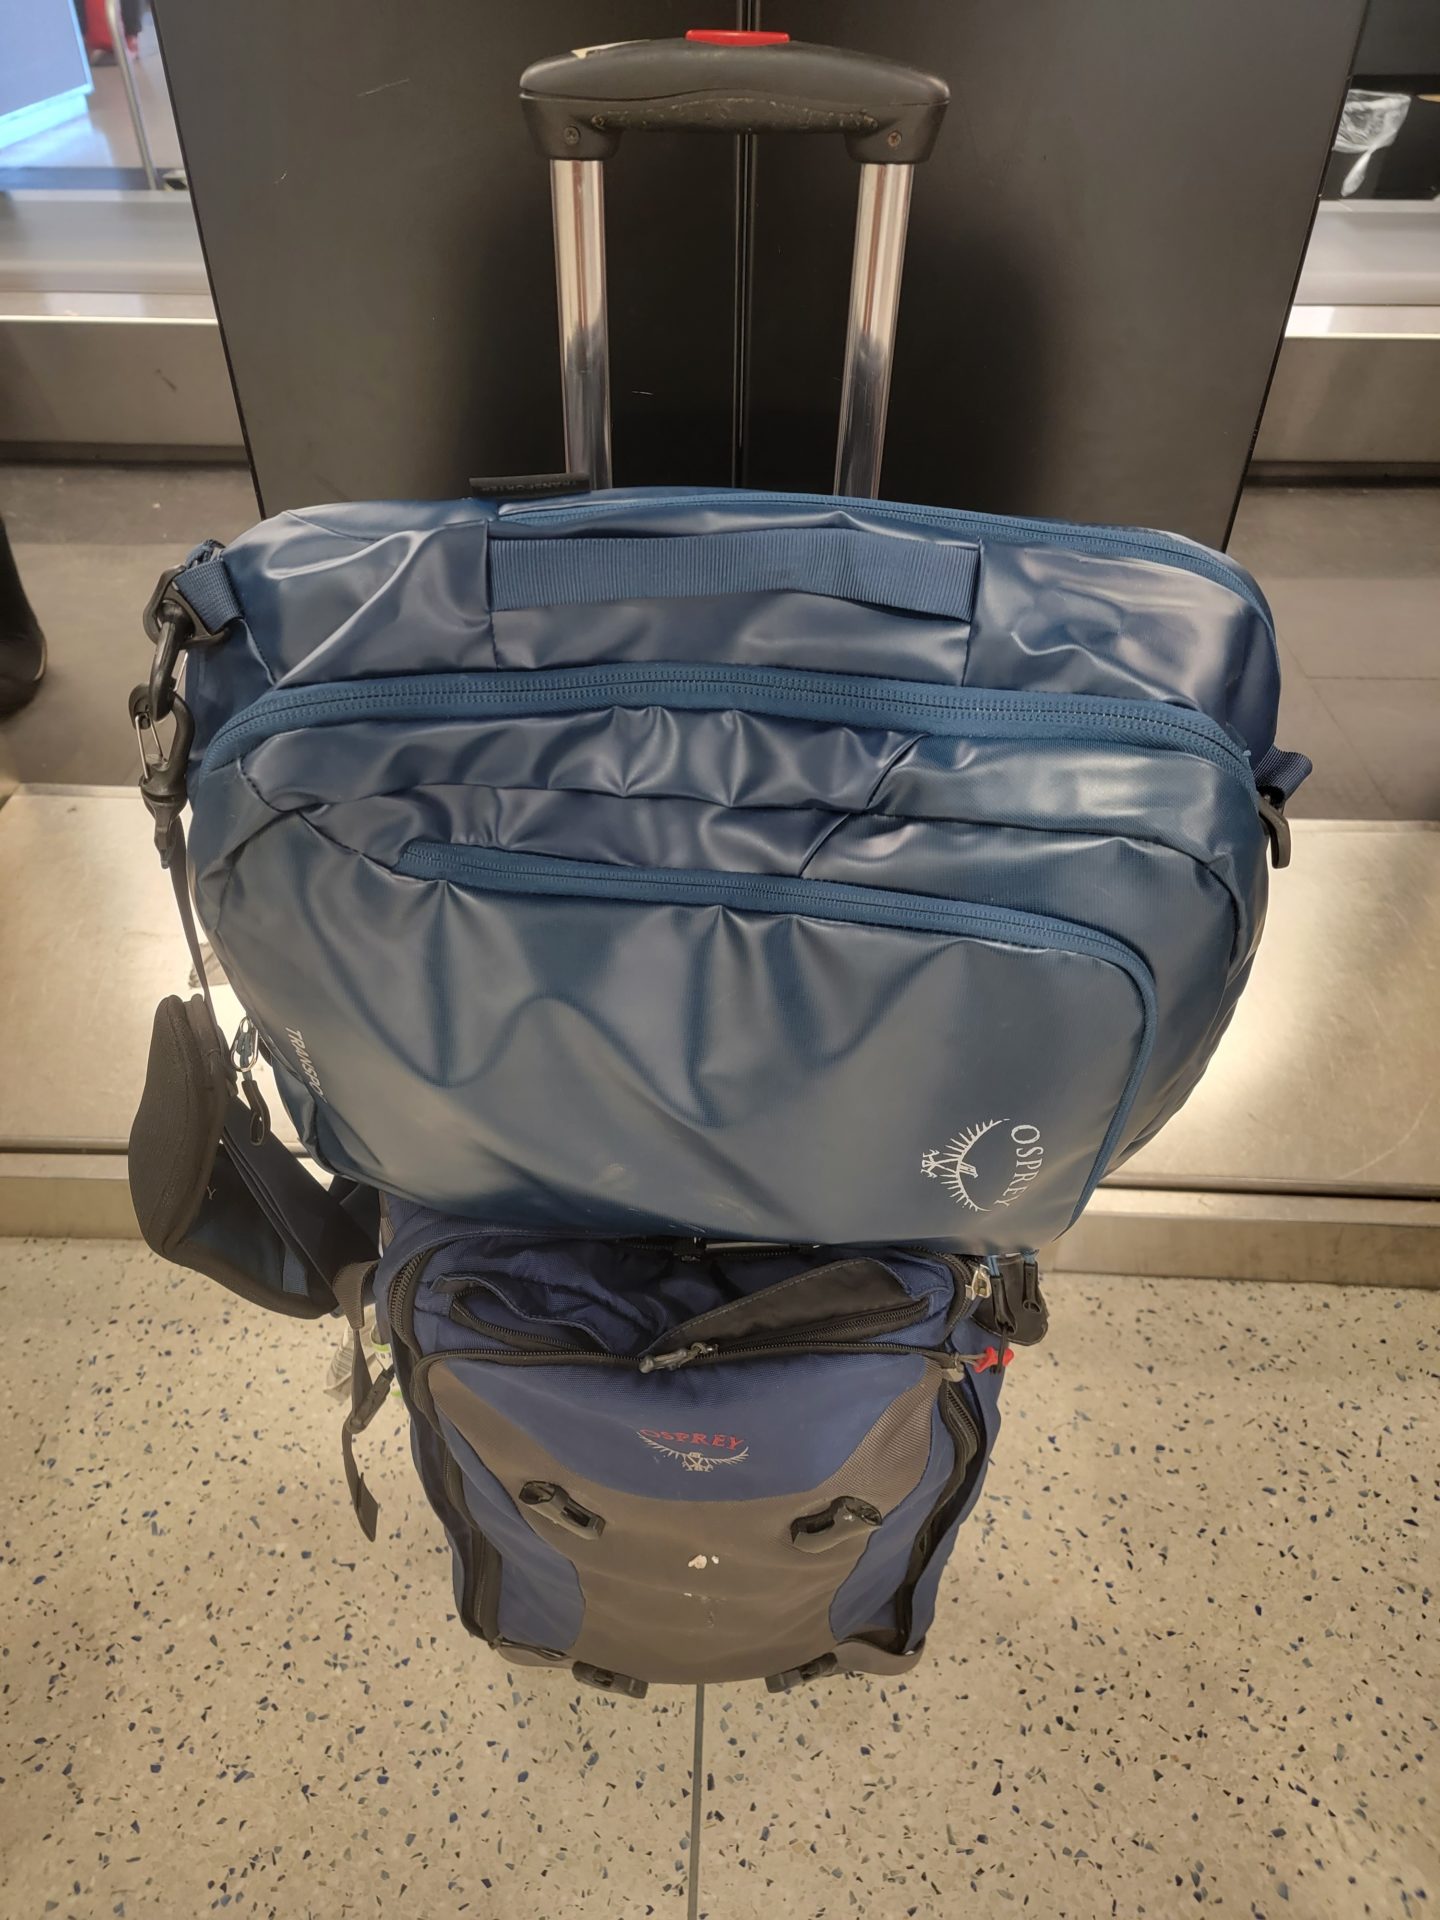 a blue and grey backpack